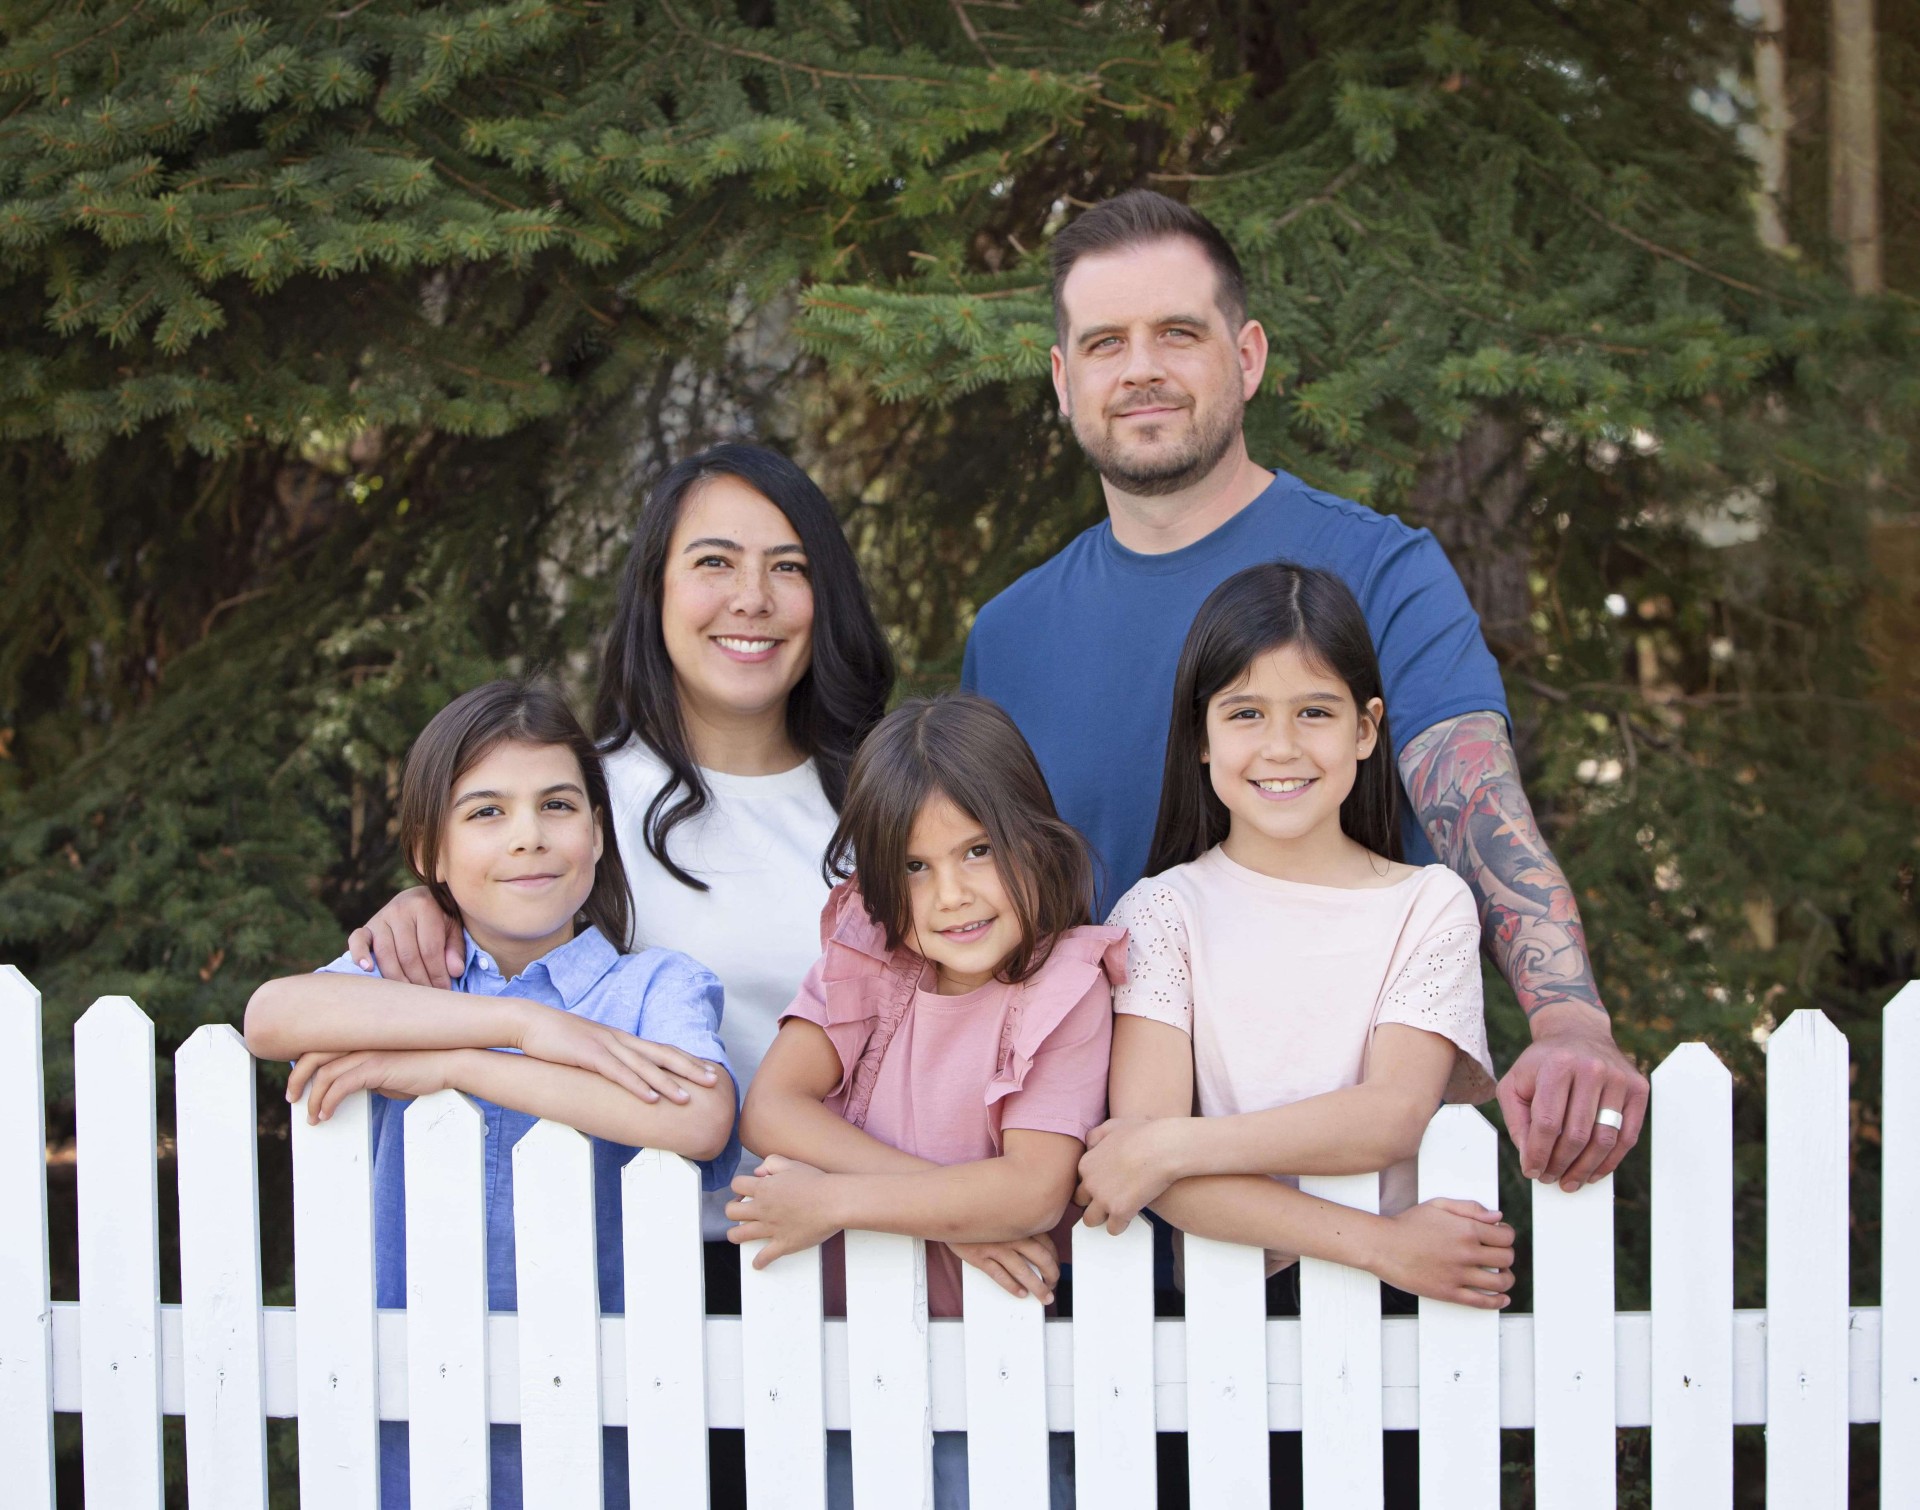 Brad Hefflick and Nydia Hefflick, owners of Dashing Dishes stand with
their three kids